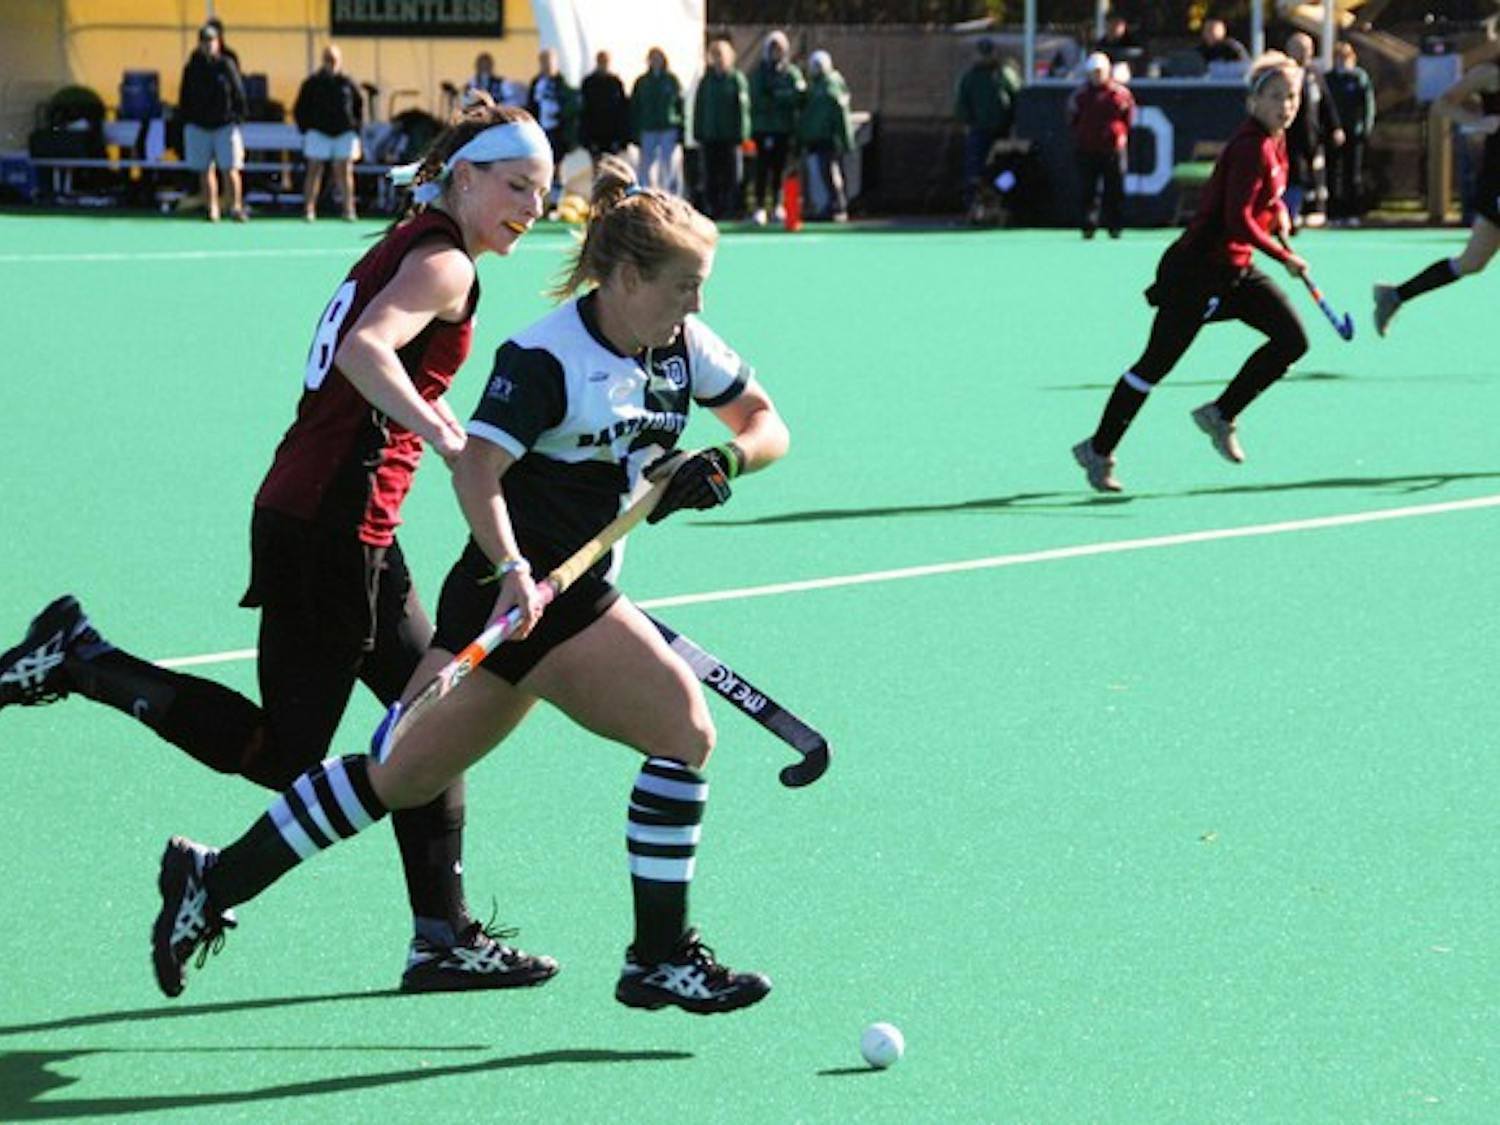 Captain Ashley '09 blows by a Harvard defender as the Big Green shutout the Crimson, 1-0 on Saturday.